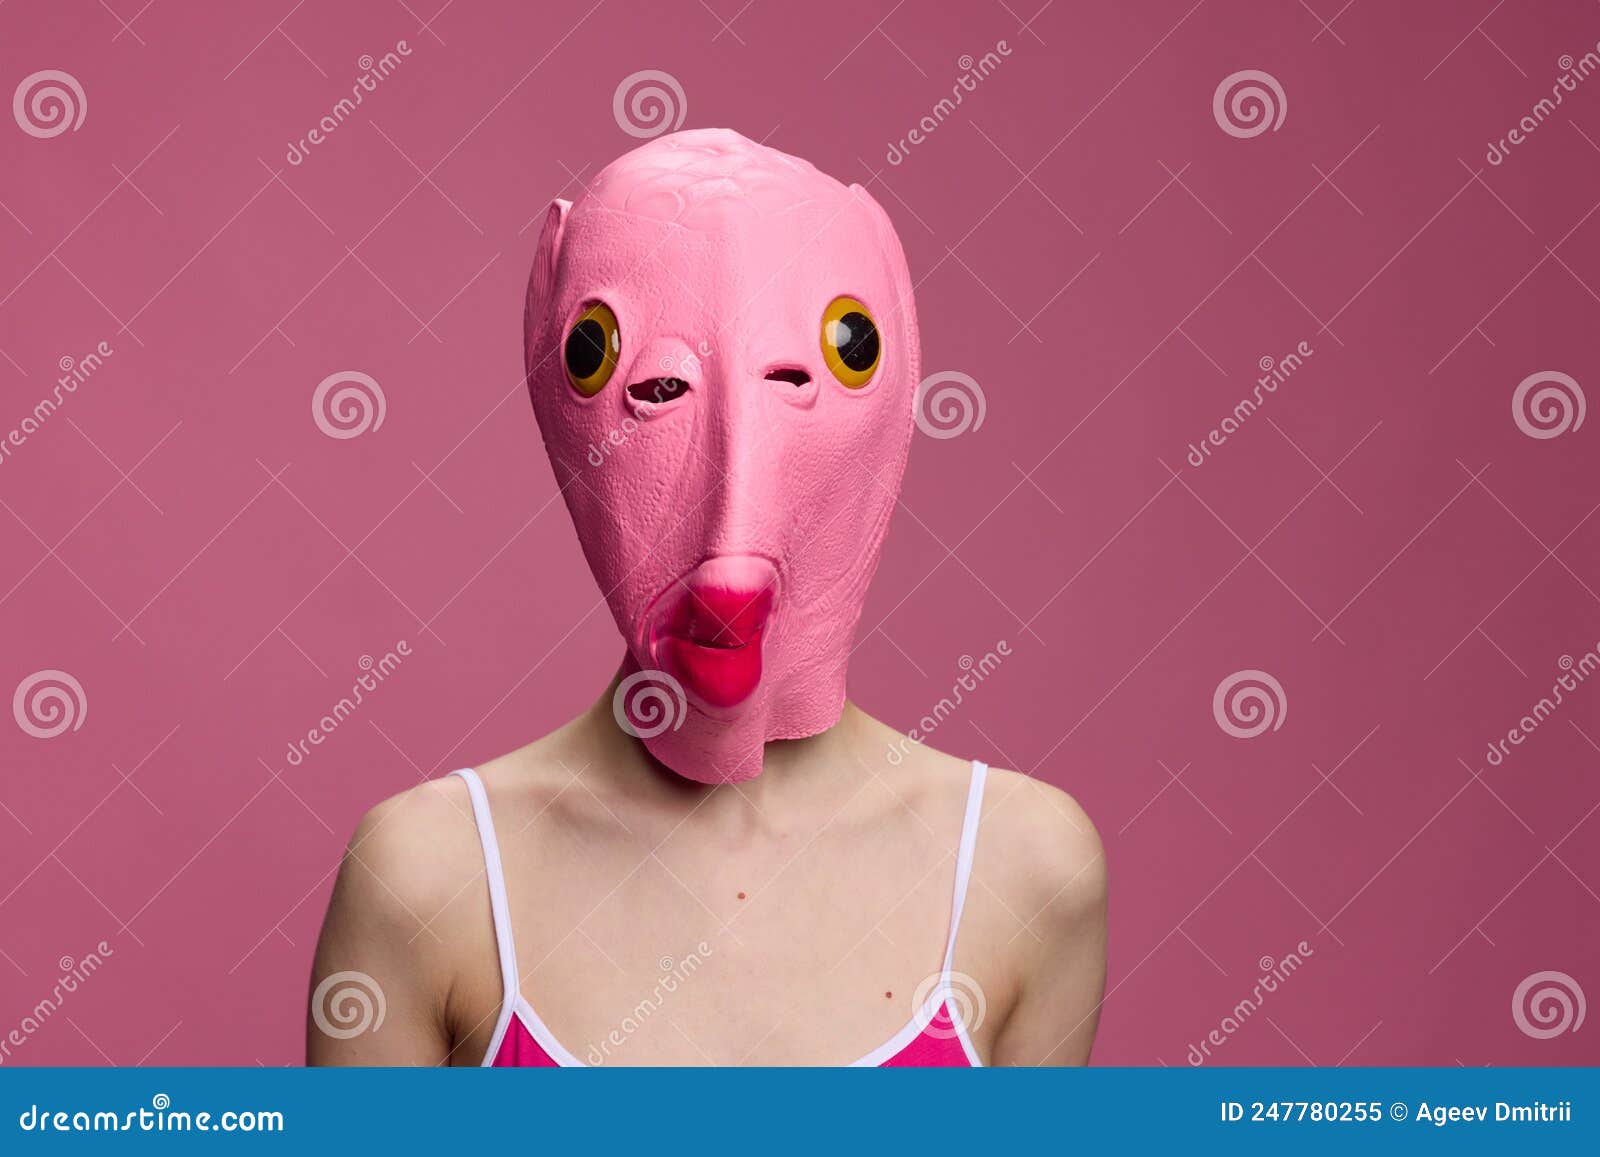 Conceptual Art Photo of a Woman in a Fish Mask for Halloween on a